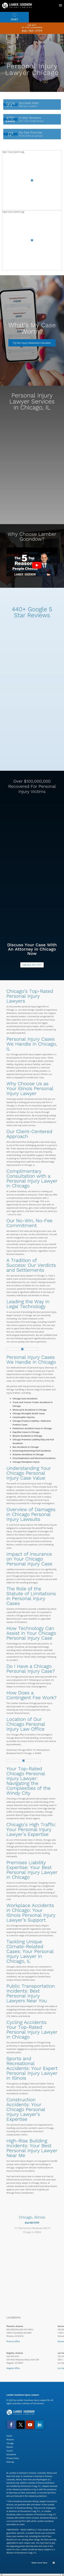 Lamber Goodnow - Chicago IL Lawyers